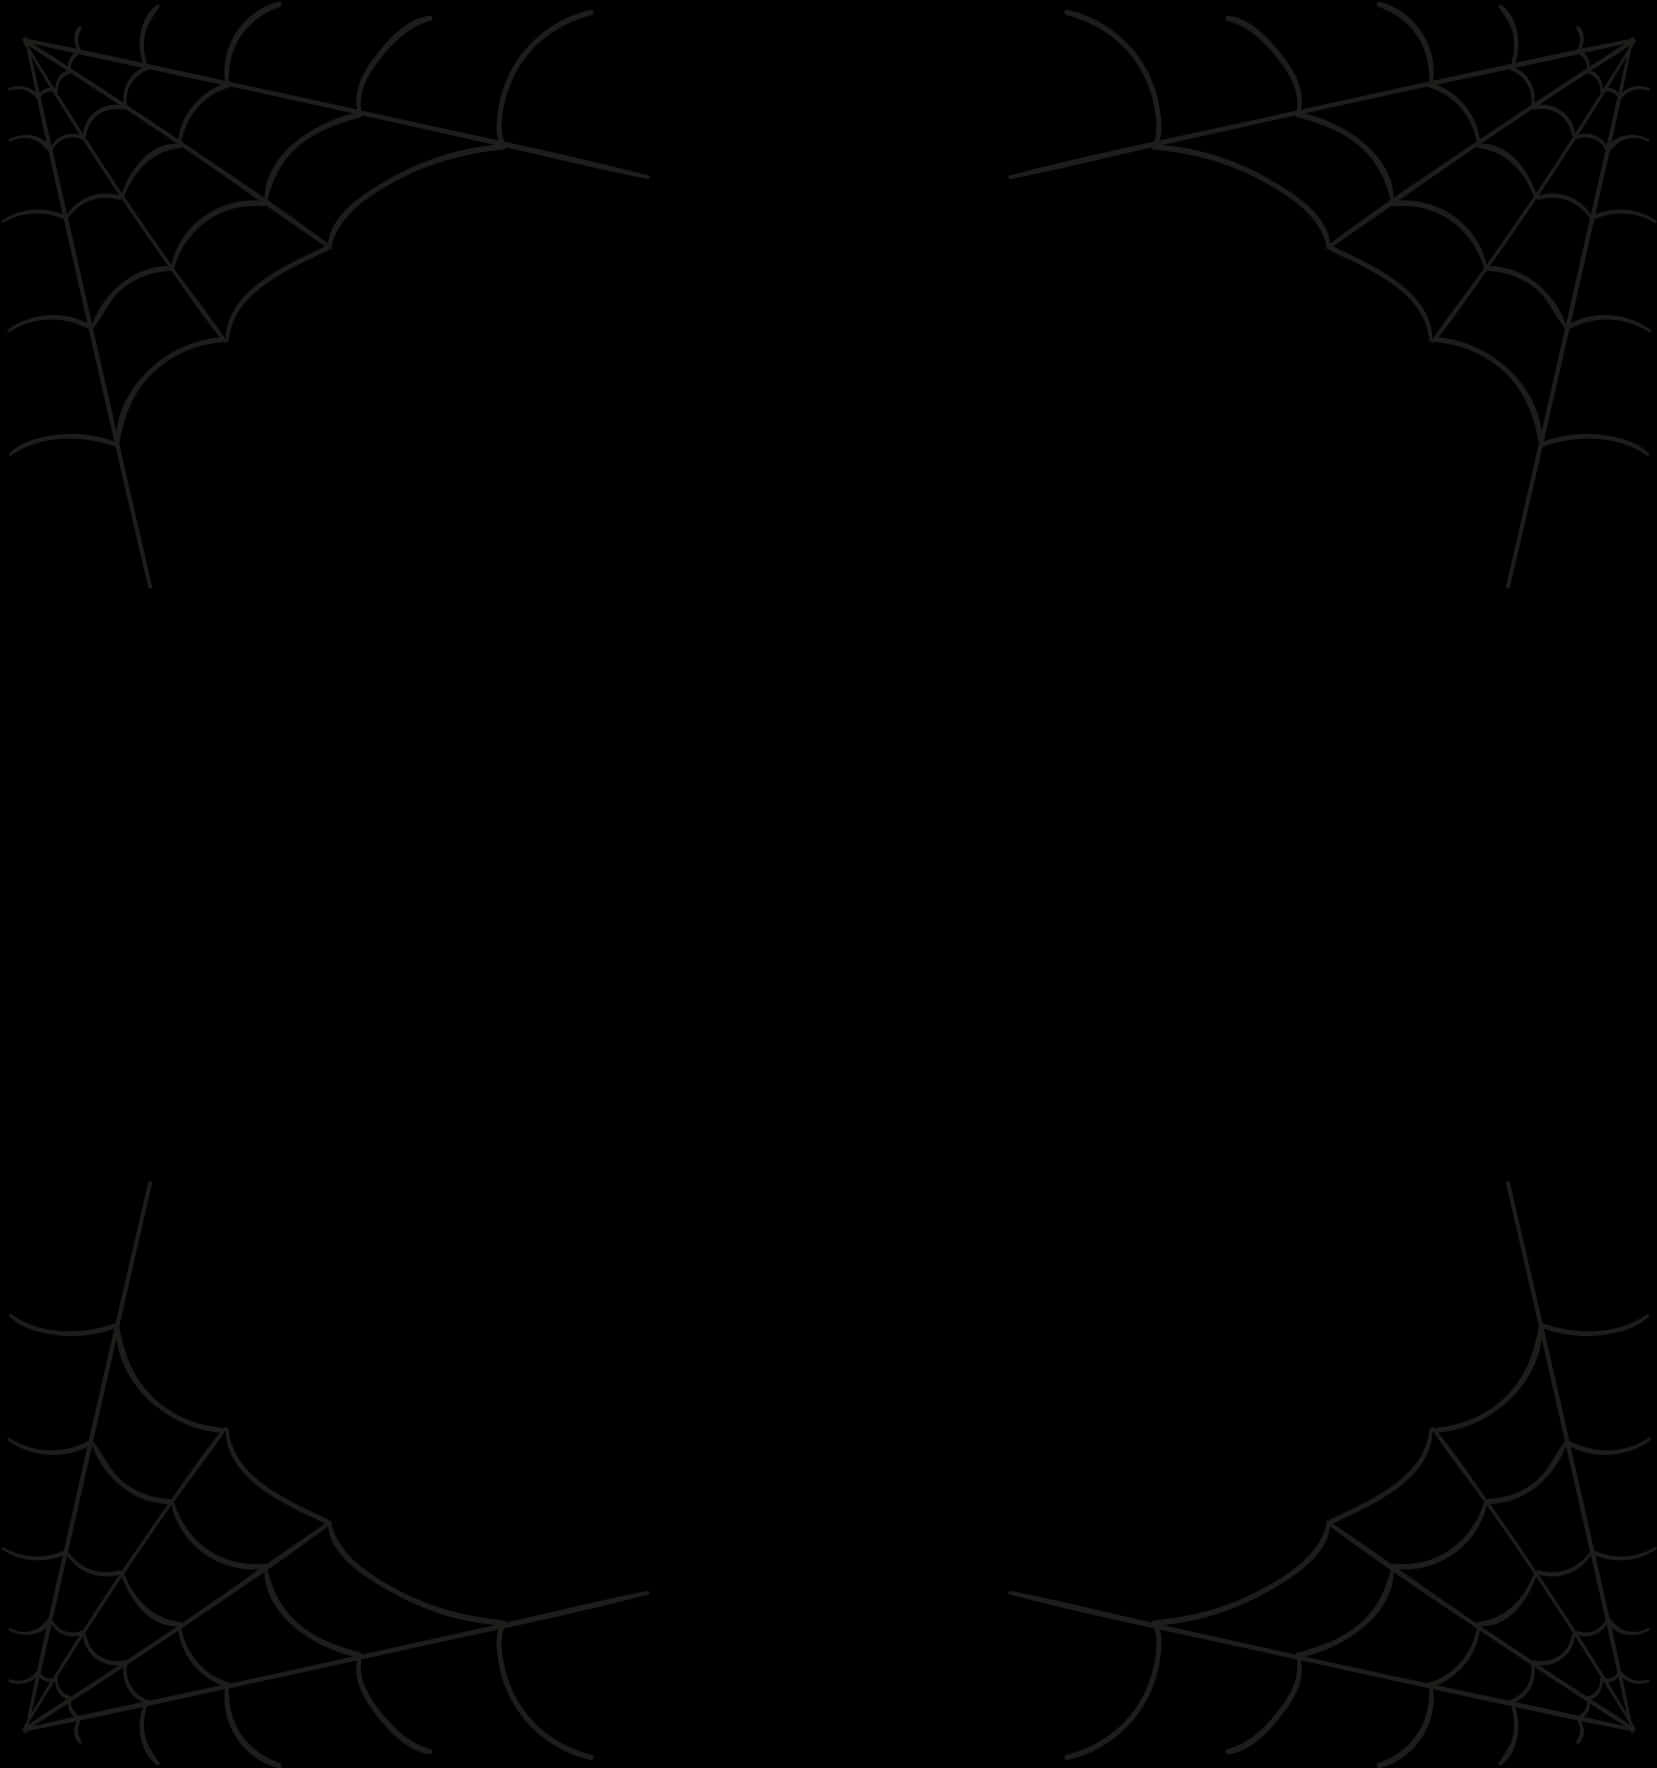 Abstract Spider Web Corners Design PNG